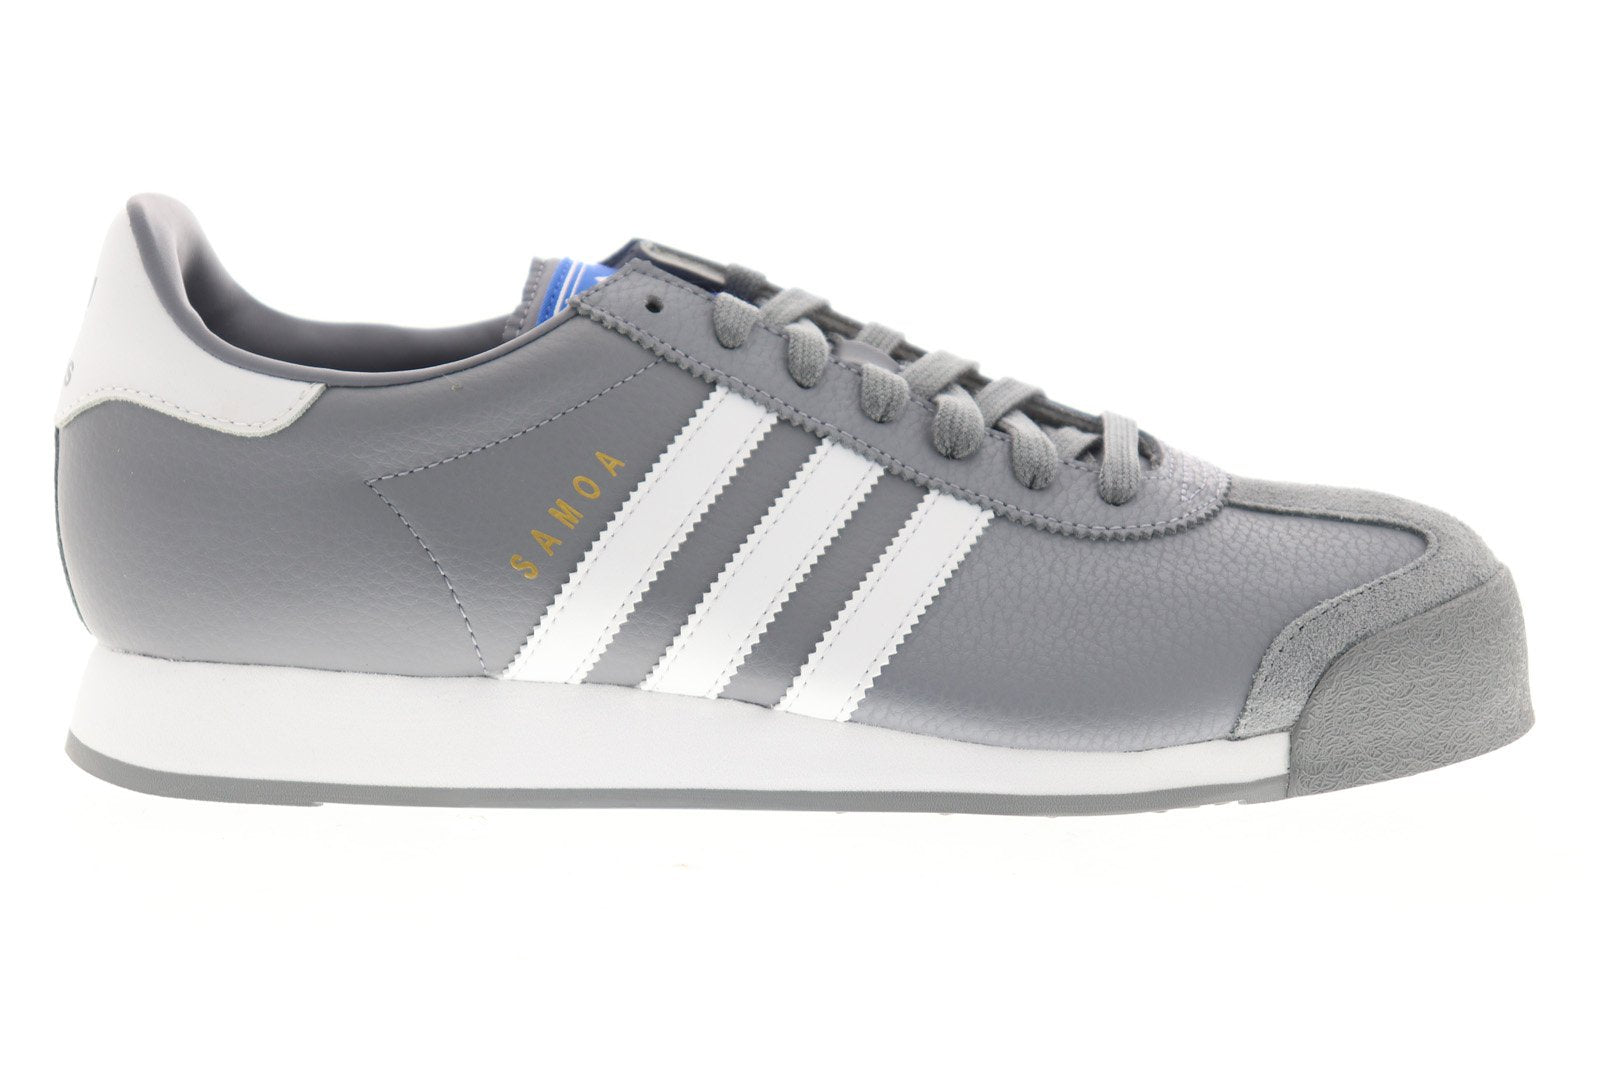 Adidas Samoa EG1576 Mens Gray Top Up Lifestyle Sneakers Shoes - Ruze Shoes